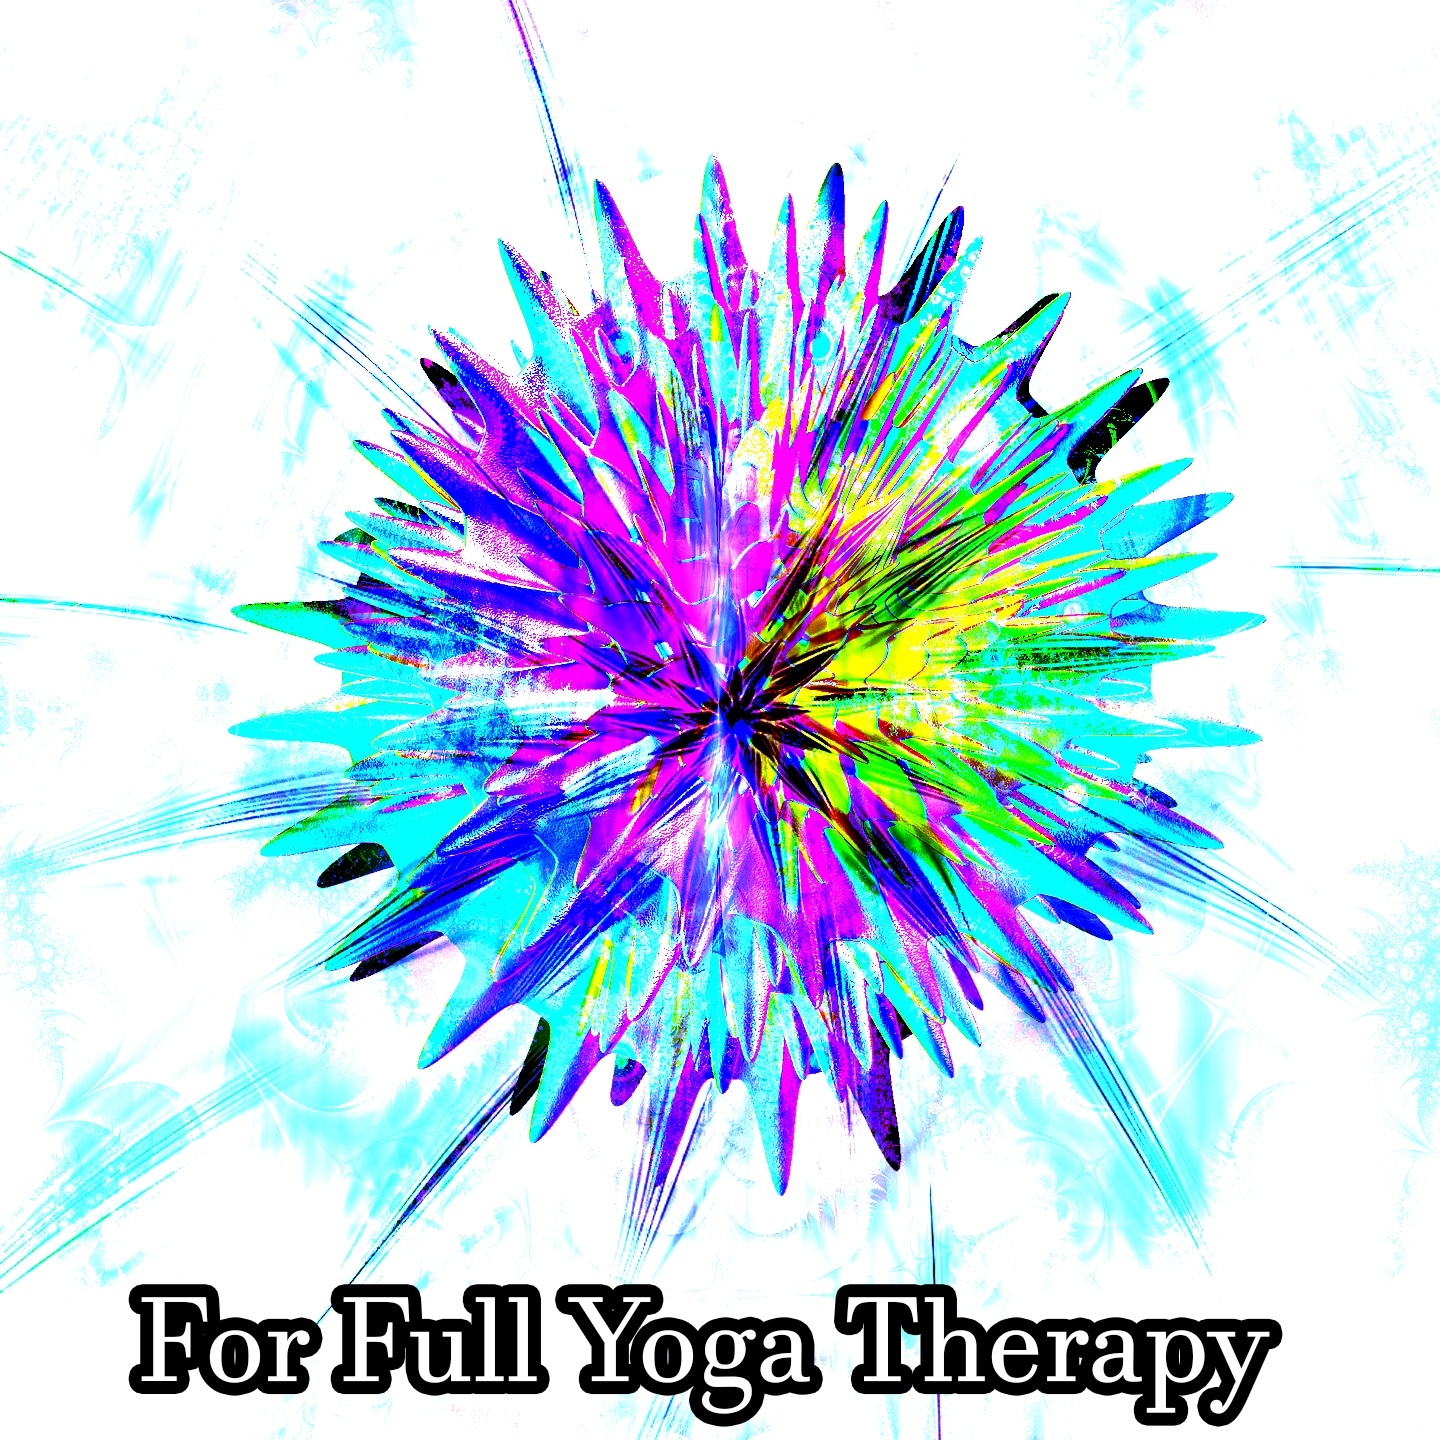 For Full Yoga Therapy